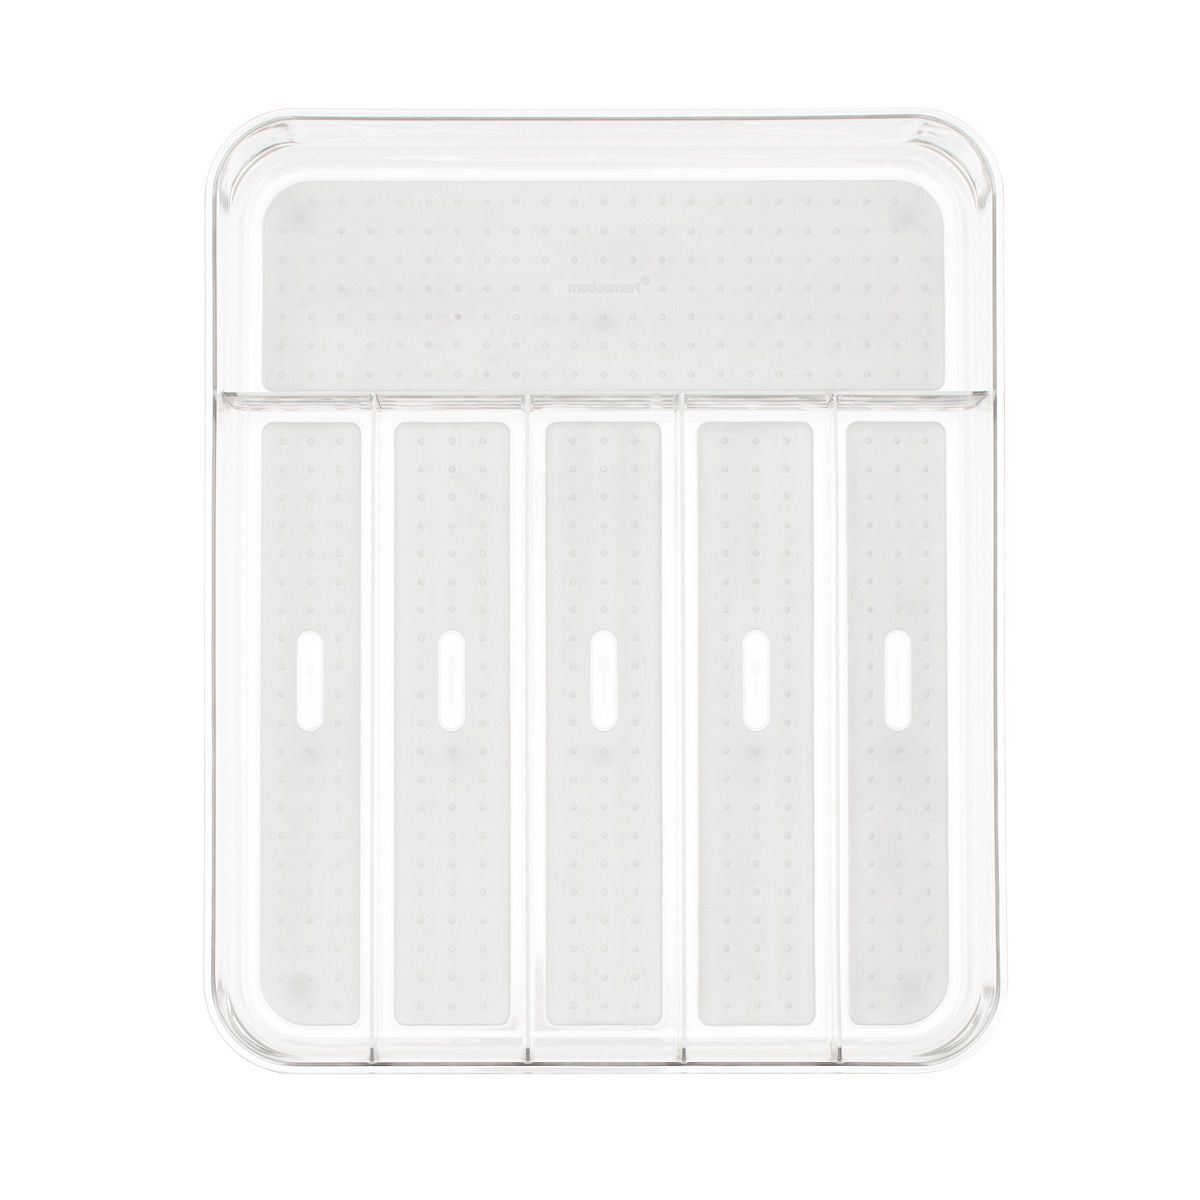 Silverware Tray | The Container Store